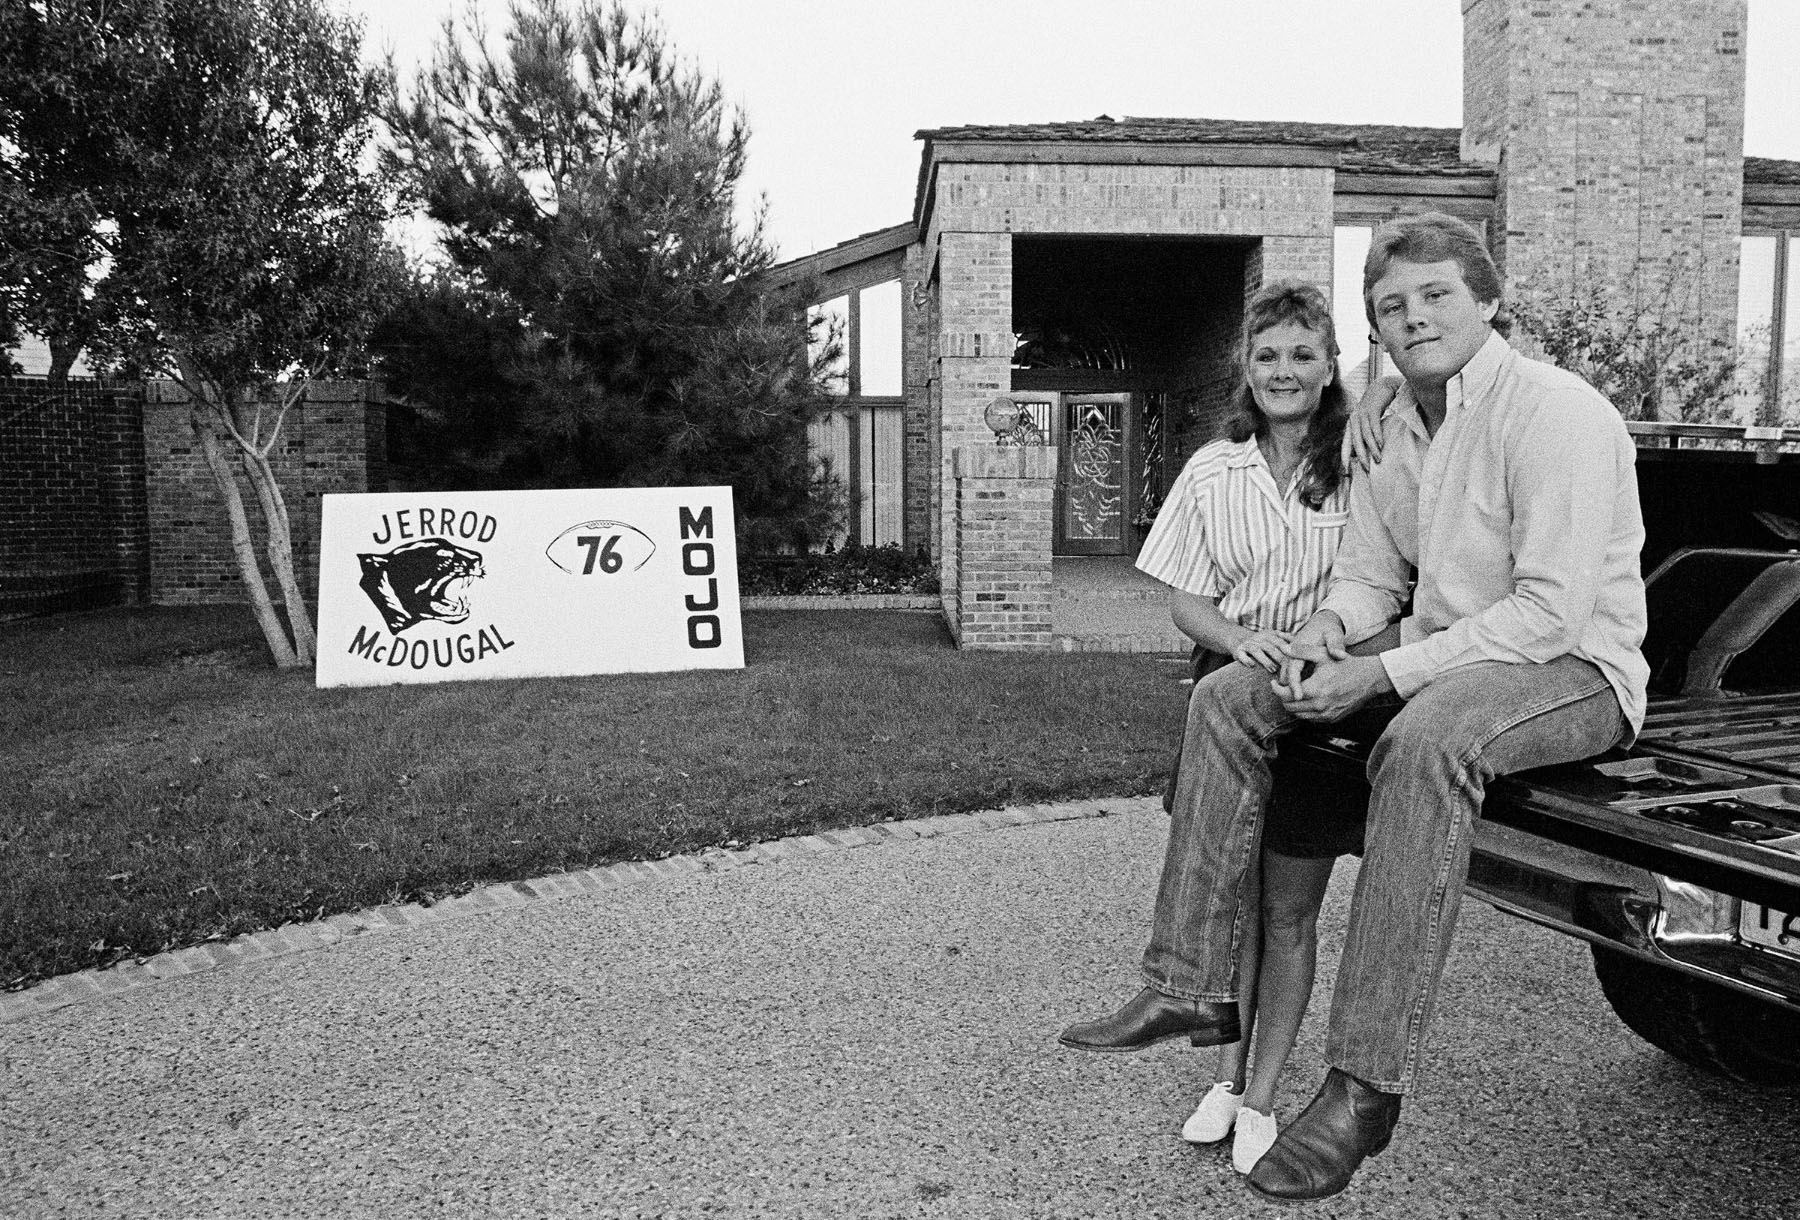 A young man and his mother sit on the tailgate of a truck next to a sign reading "Jerrod McDougal, 76, MOJO"